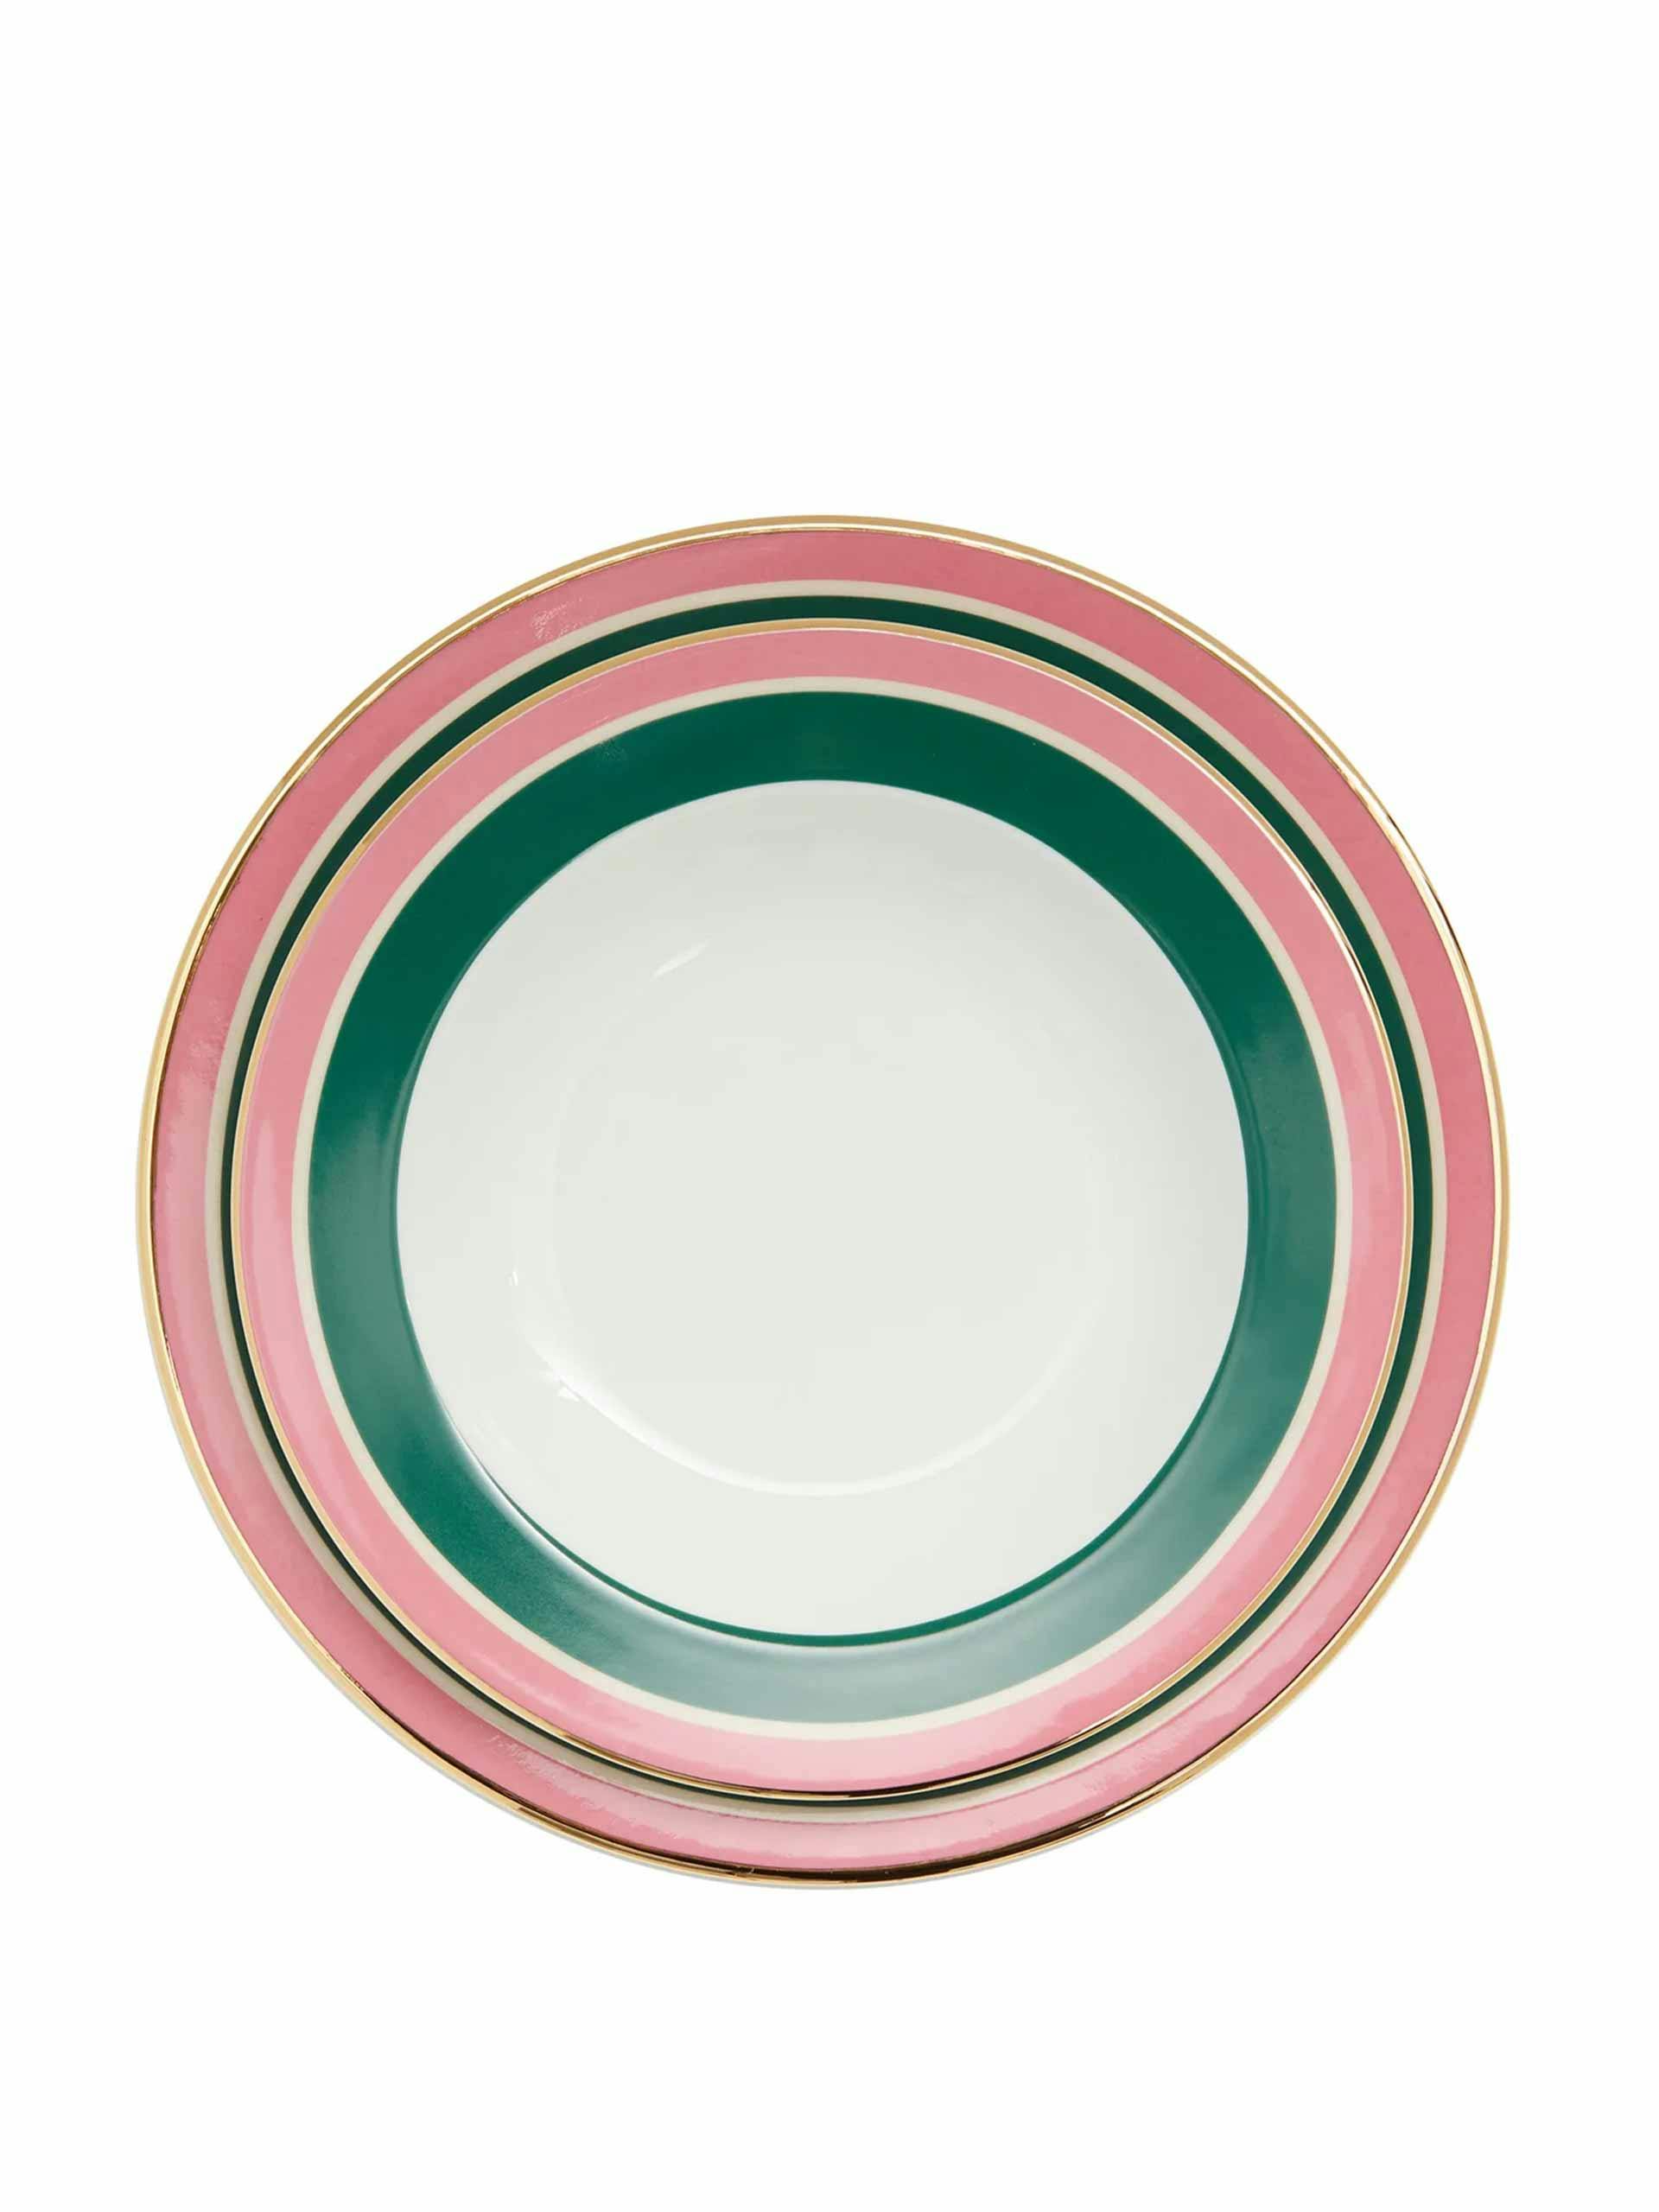 Pink and green trim bowl and plate set